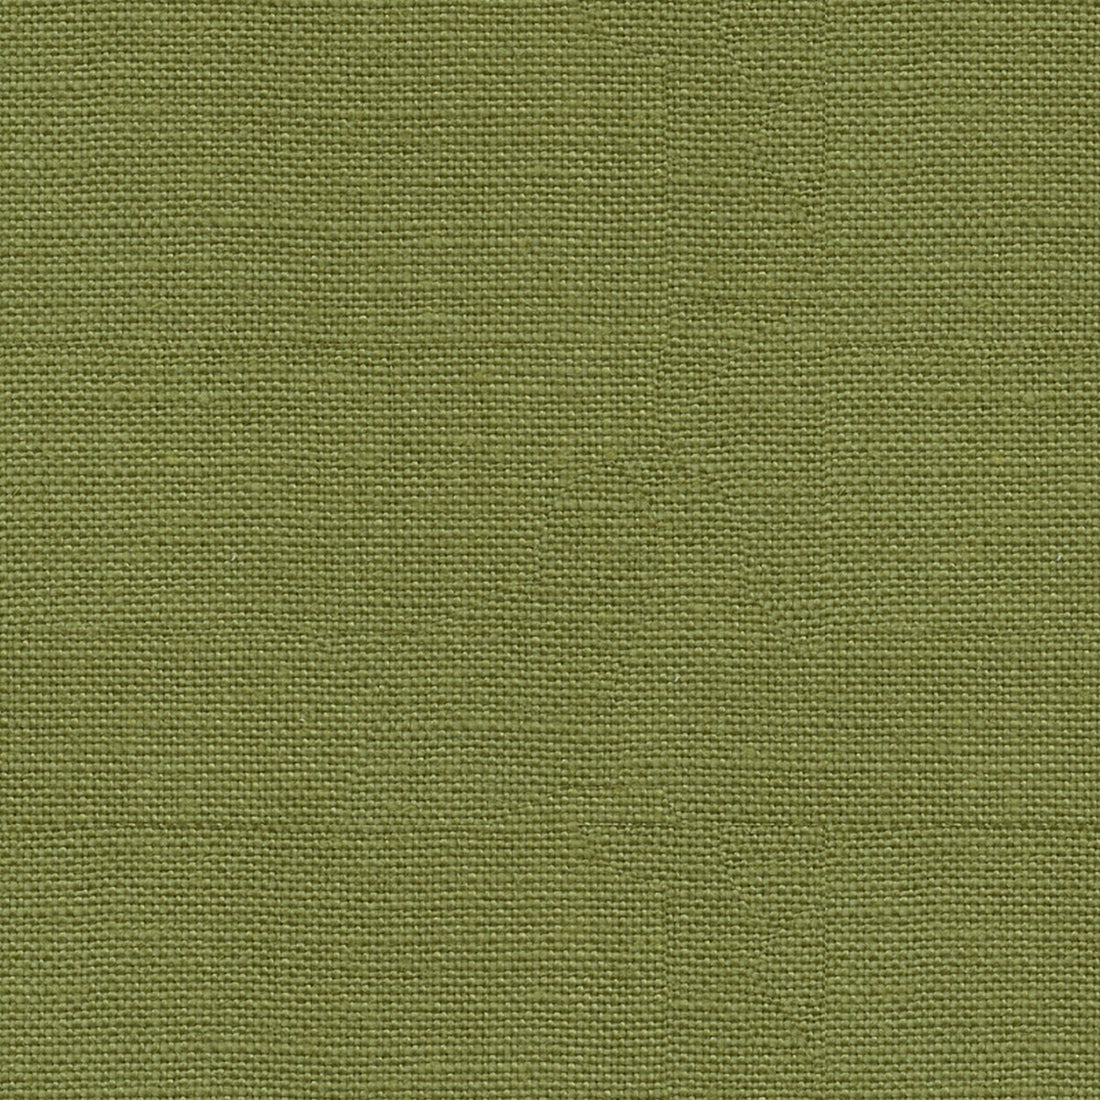 Lea fabric in olive color - pattern J0337.760.0 - by G P &amp; J Baker in the Crayford collection